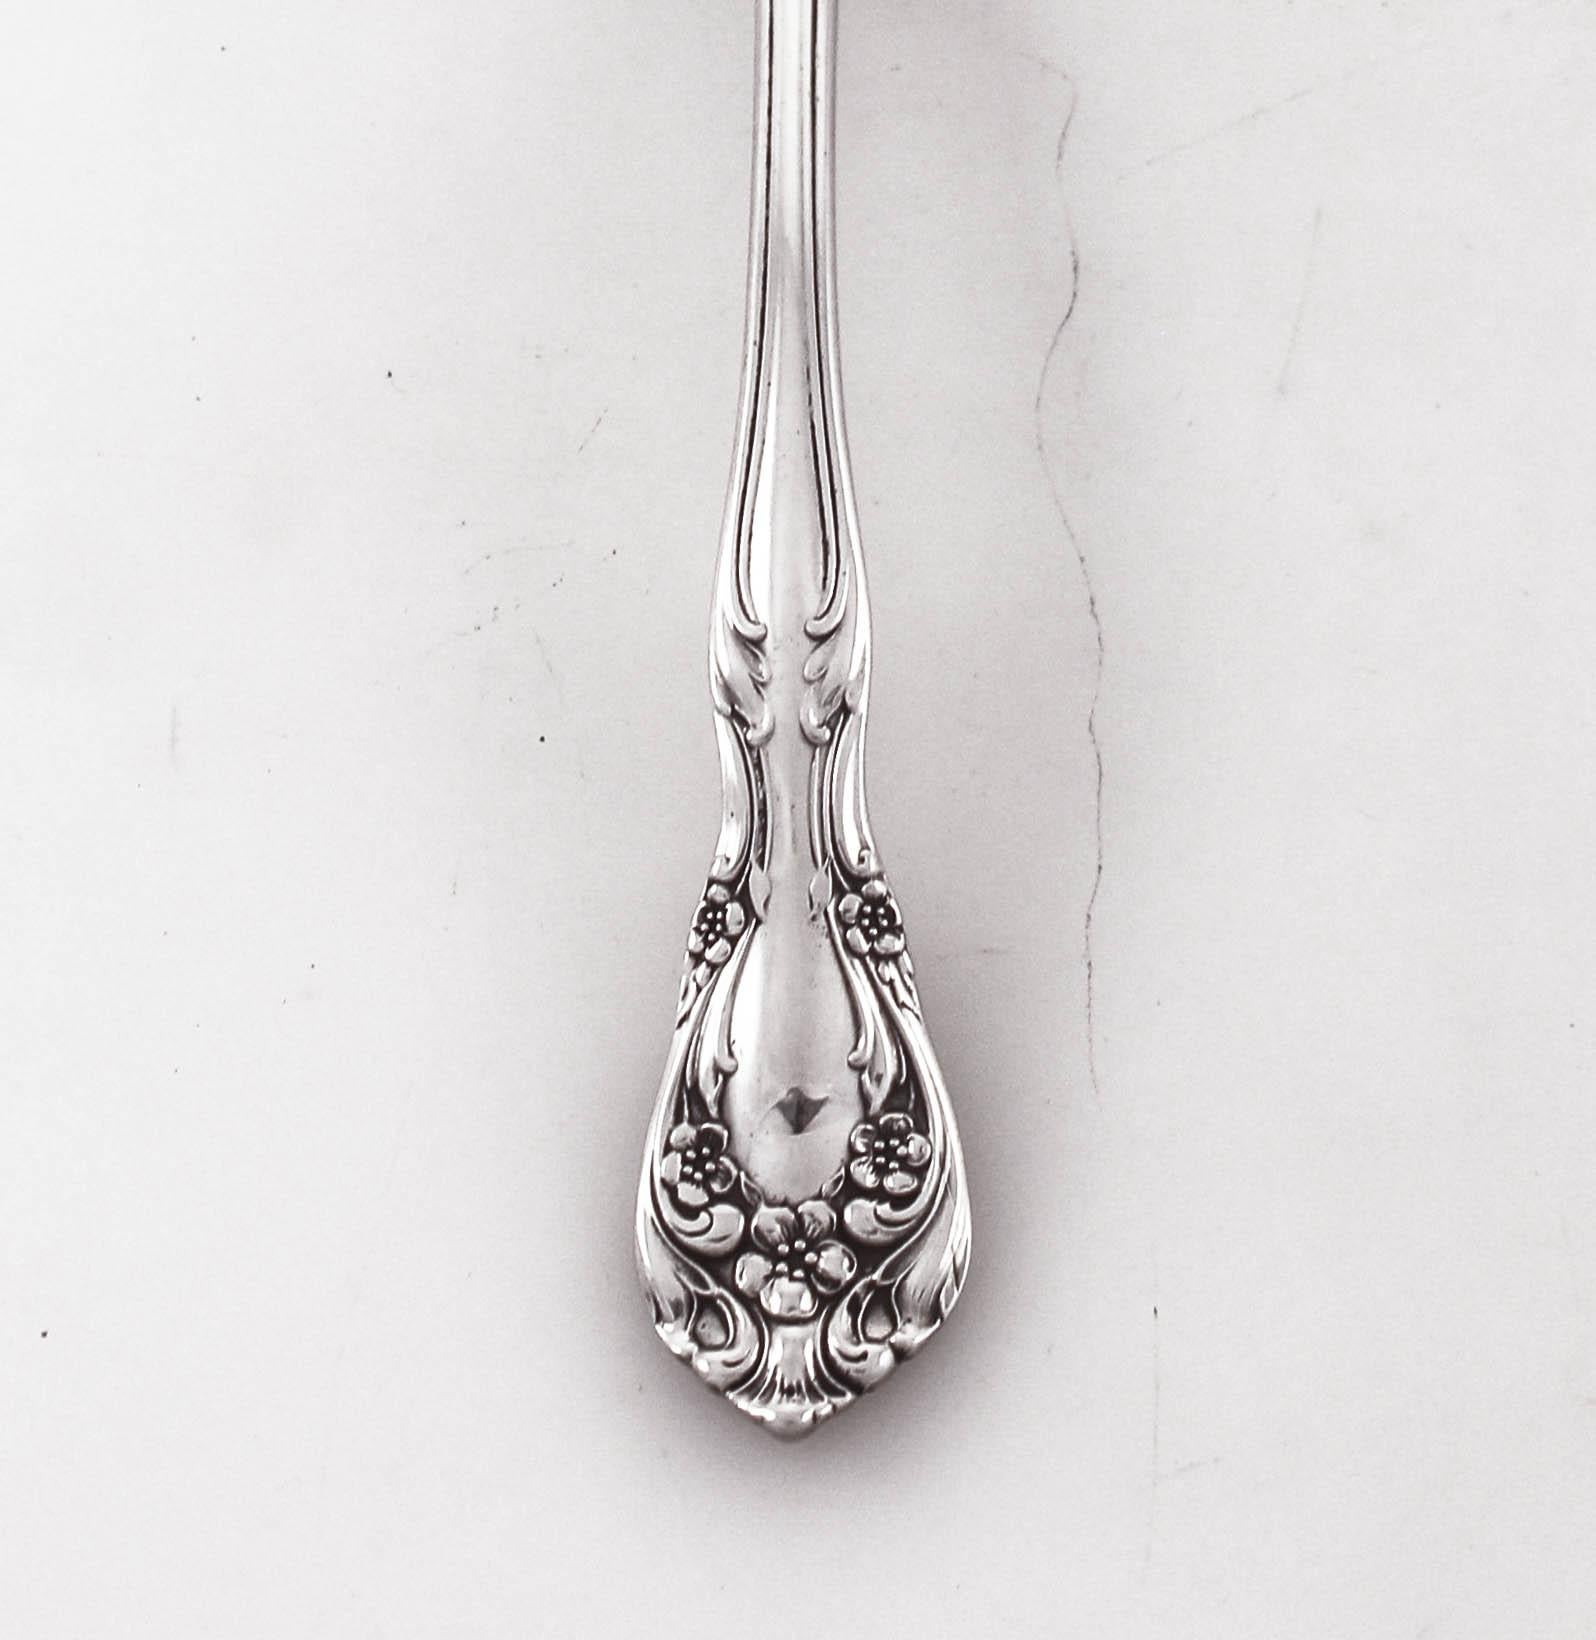 American Sterling Chateau Rose Ladle